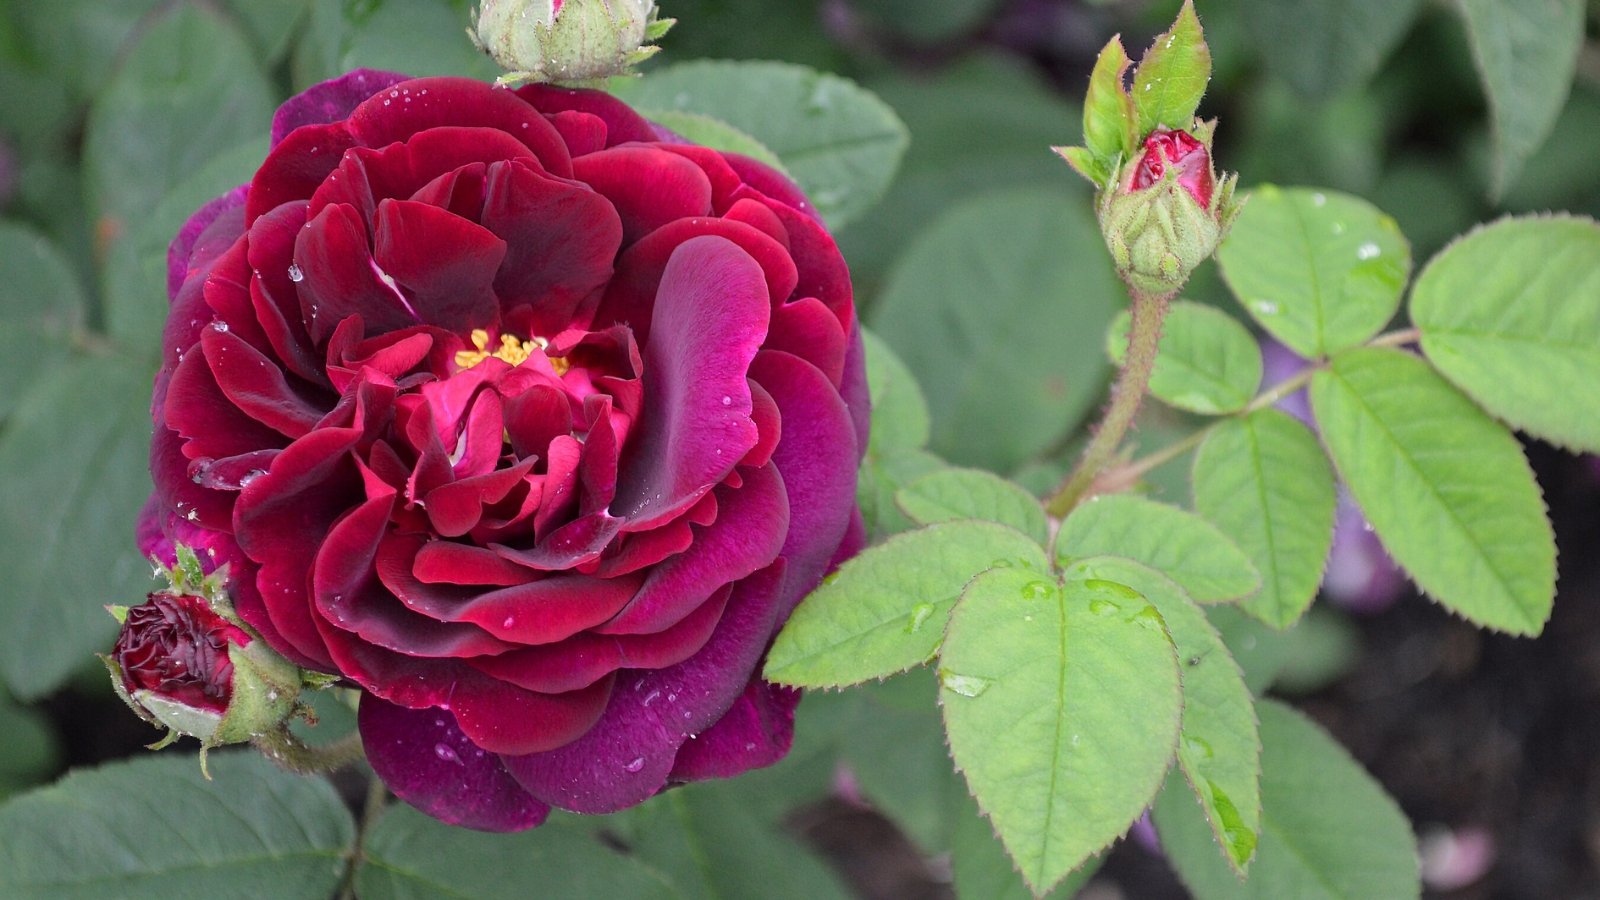 Rosa ‘Tuscany Superb’ presents sturdy stems, dark green leaves, and rich, dark crimson, double flowers with a velvety texture.